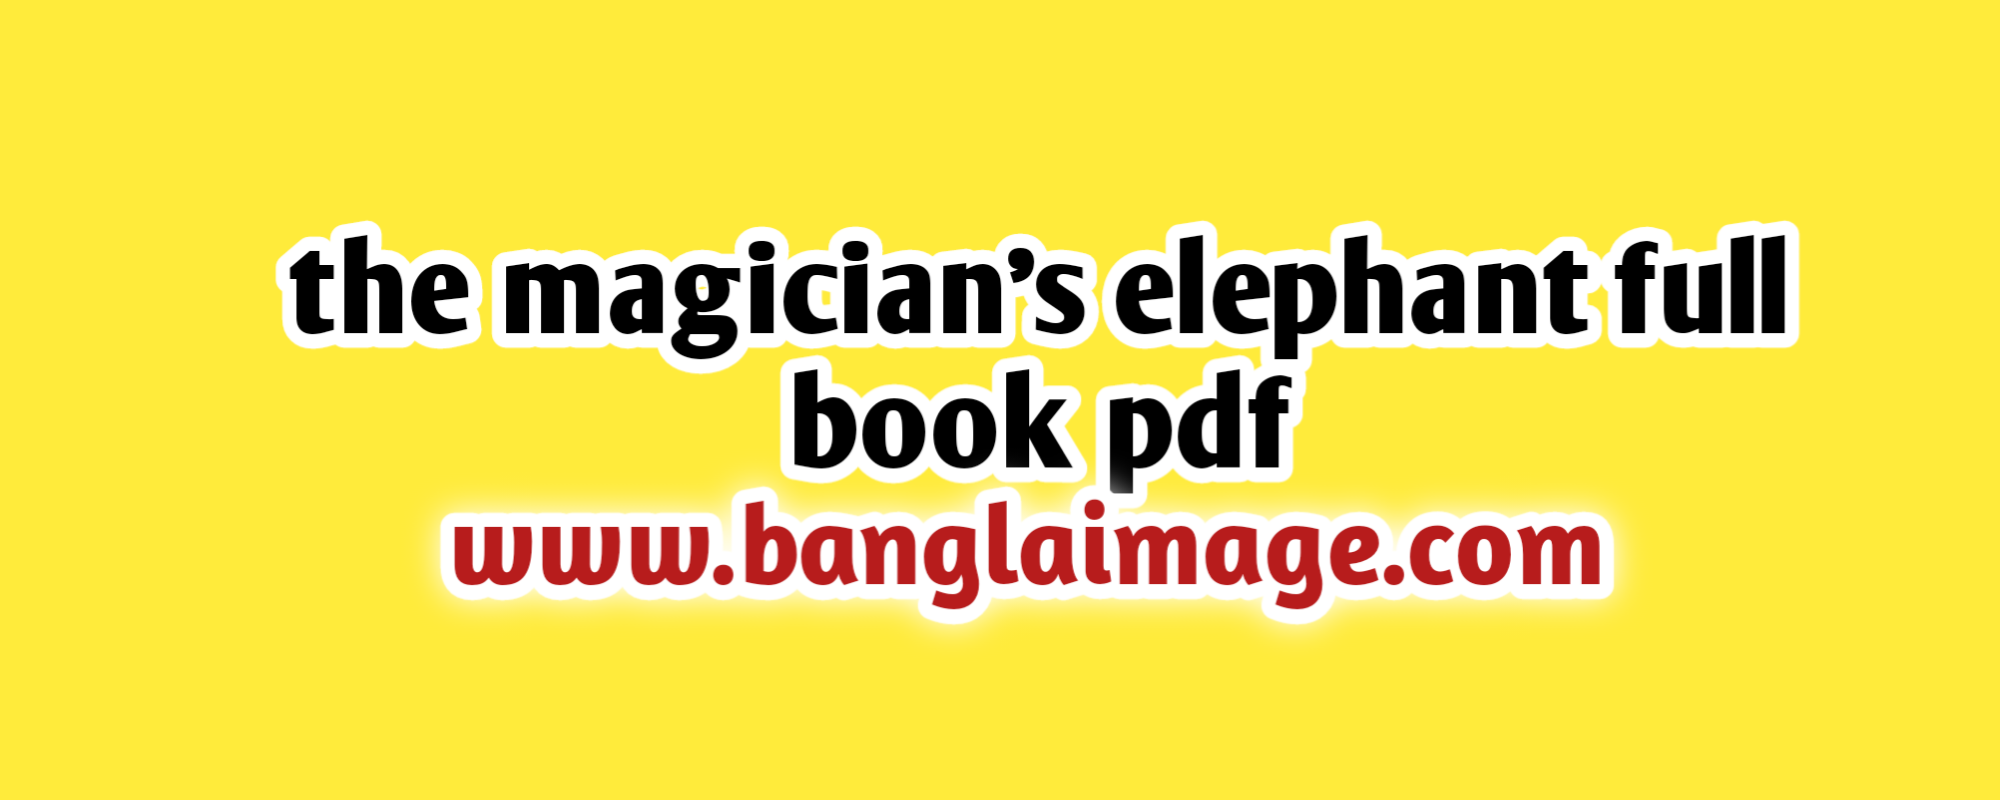 the magician's elephant full book pdf, the magicians elephant summary now download, from the magicians elephant answer key, the the magicians elephant summary now download